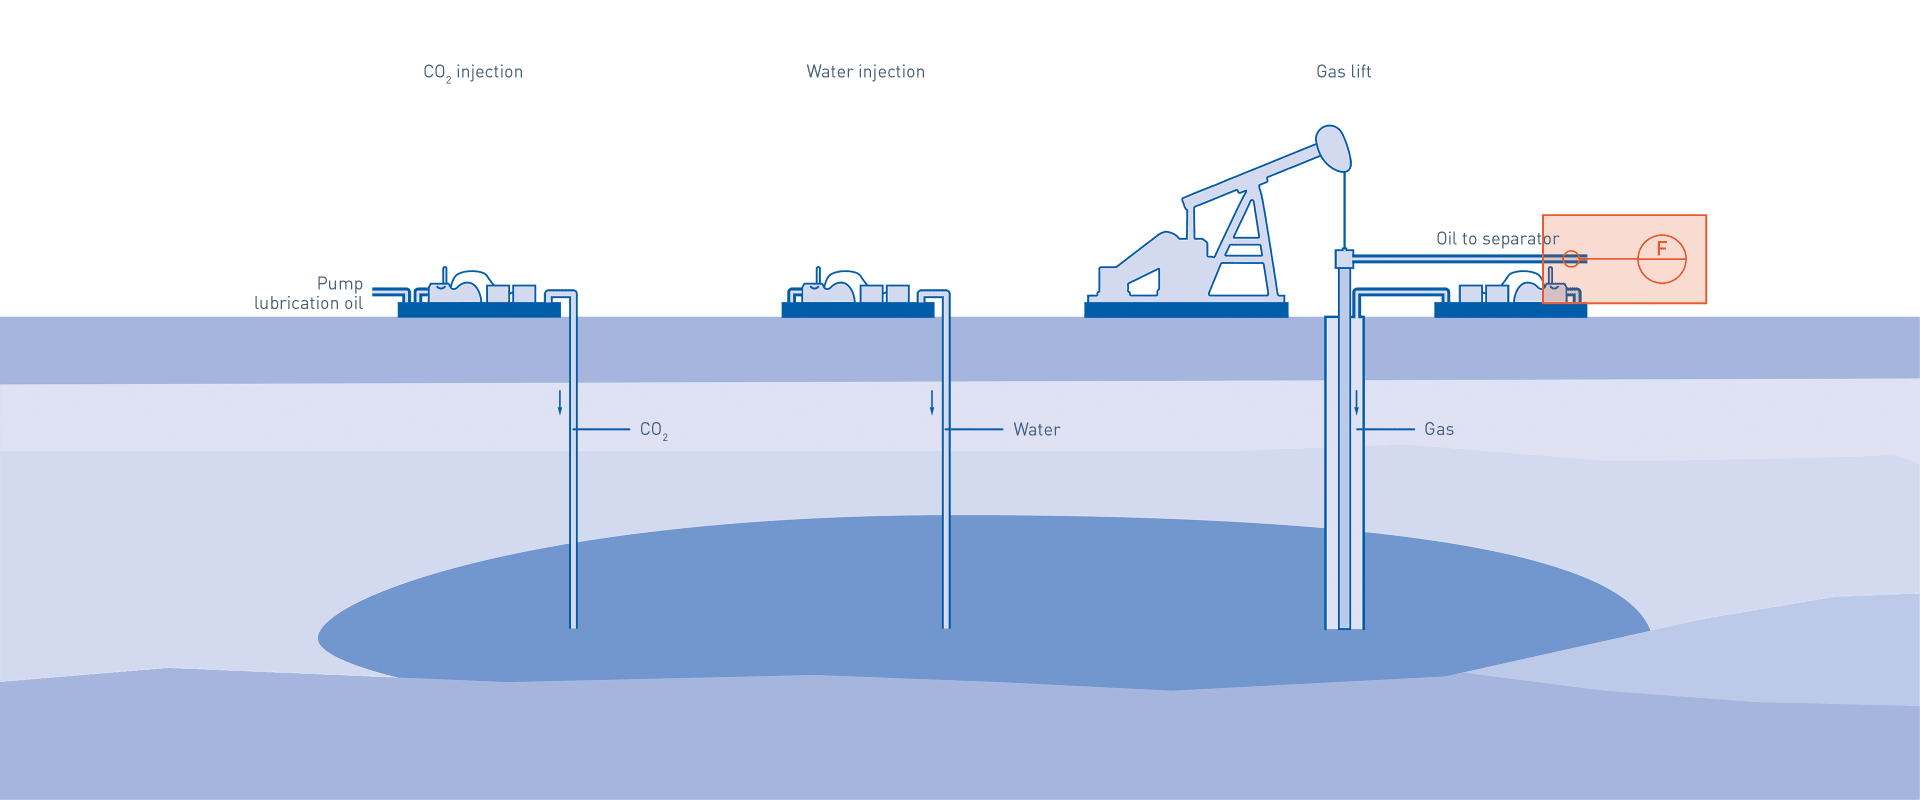 CO2 injection, water injection and gas lift in the oil & gas industry – Oil production measurement